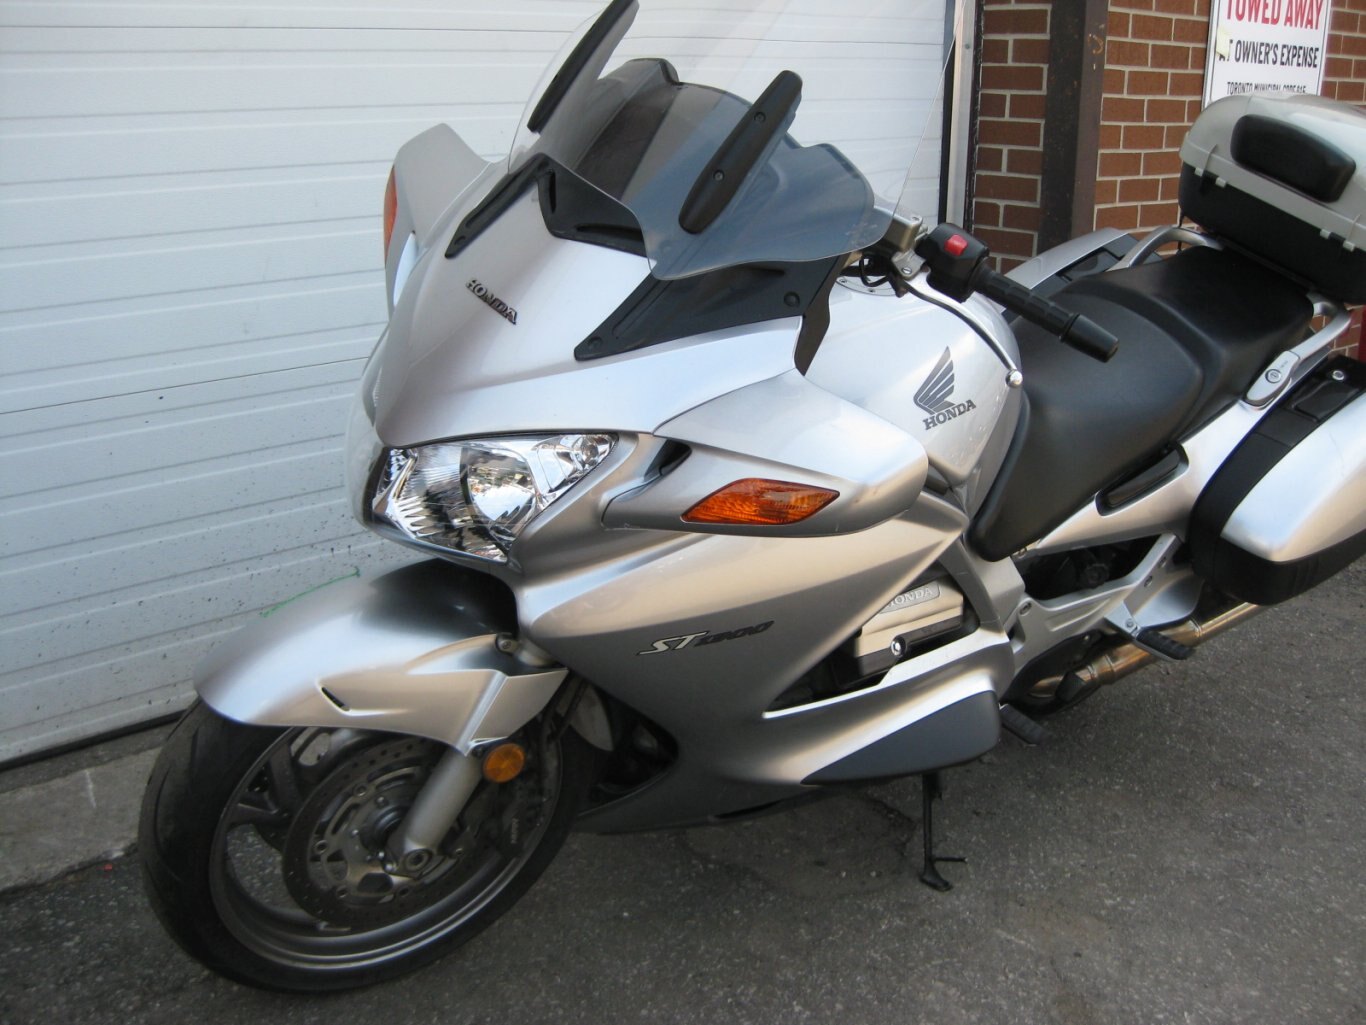 2007 Honda ST1300ABS SOLD CONGRATULATIONS GARY, WELCOME TO THE WORLD OF COMFORT ON YOUR NEW SPORT TOURING!!